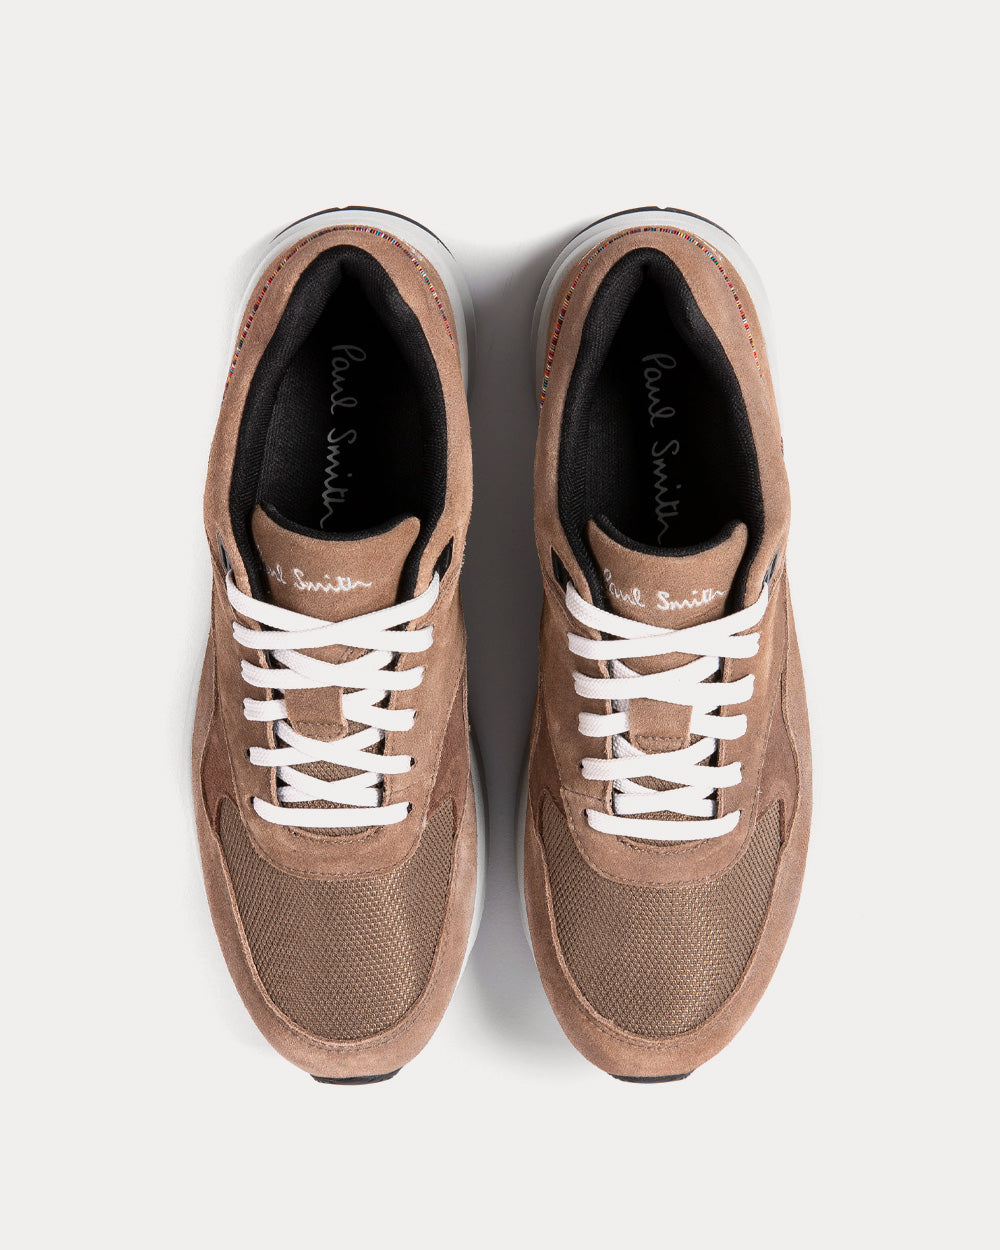 Paul Smith - Aster Suede Taupe Low Top Sneakers